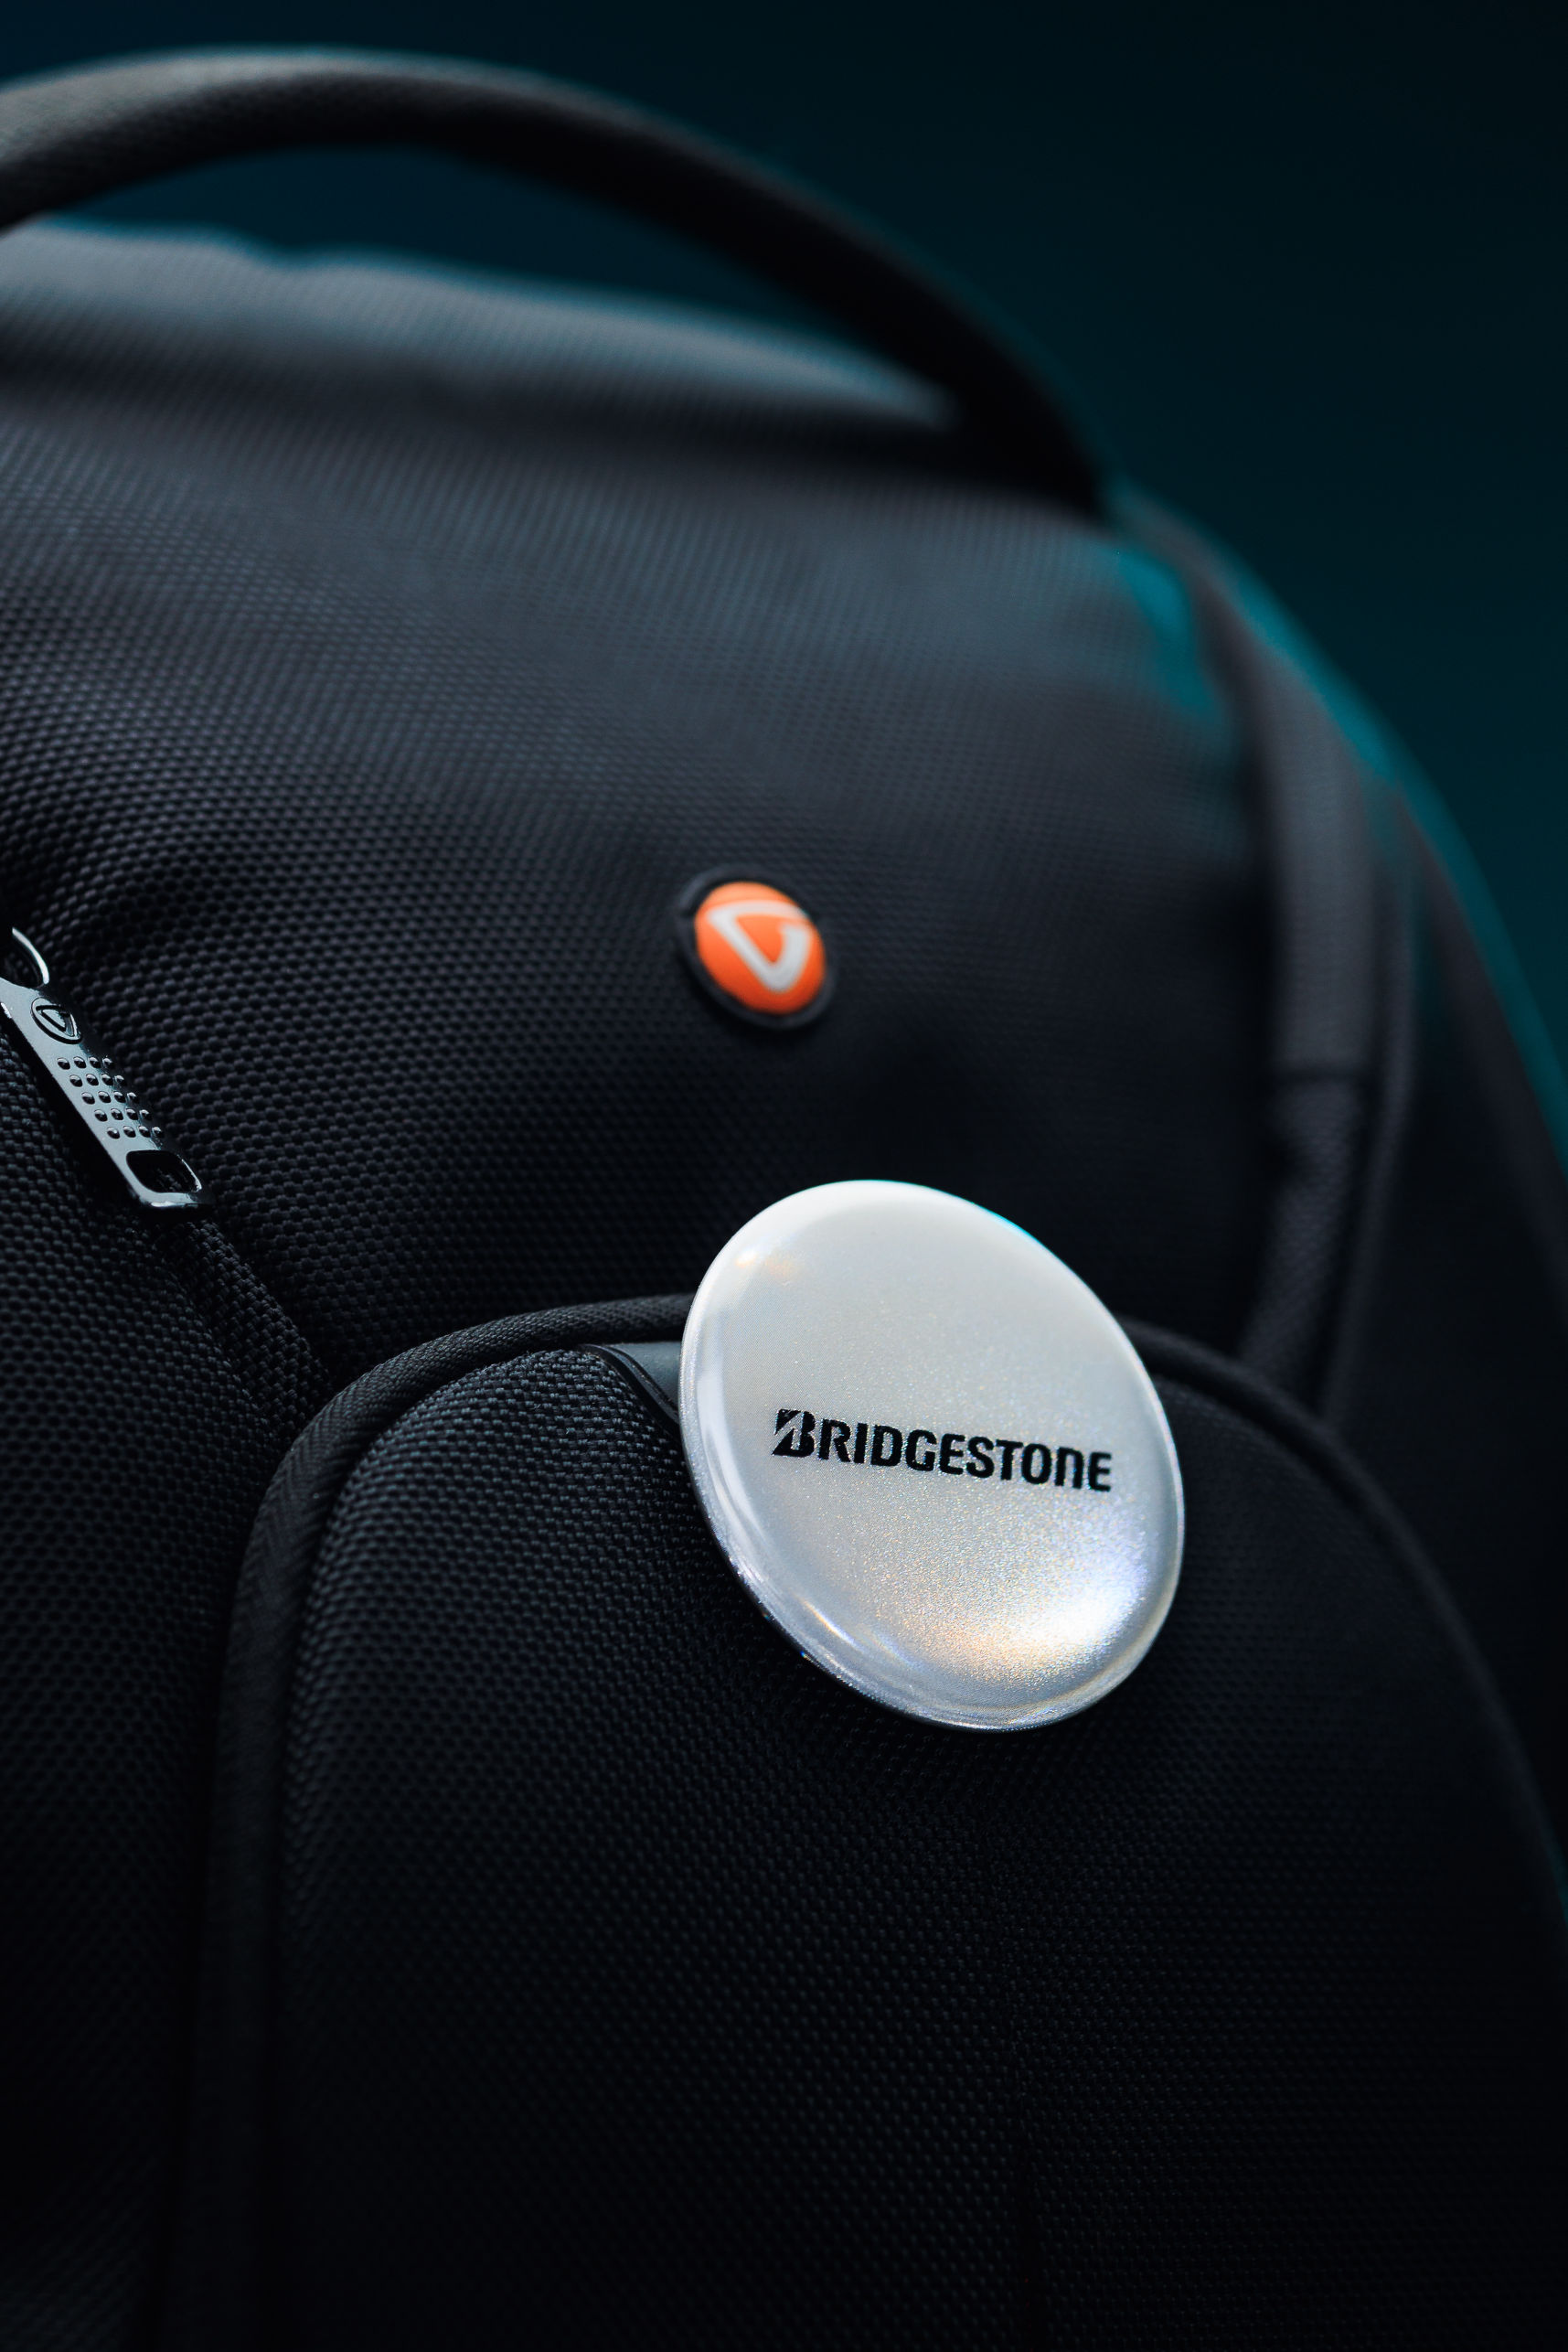 Branded reflective button